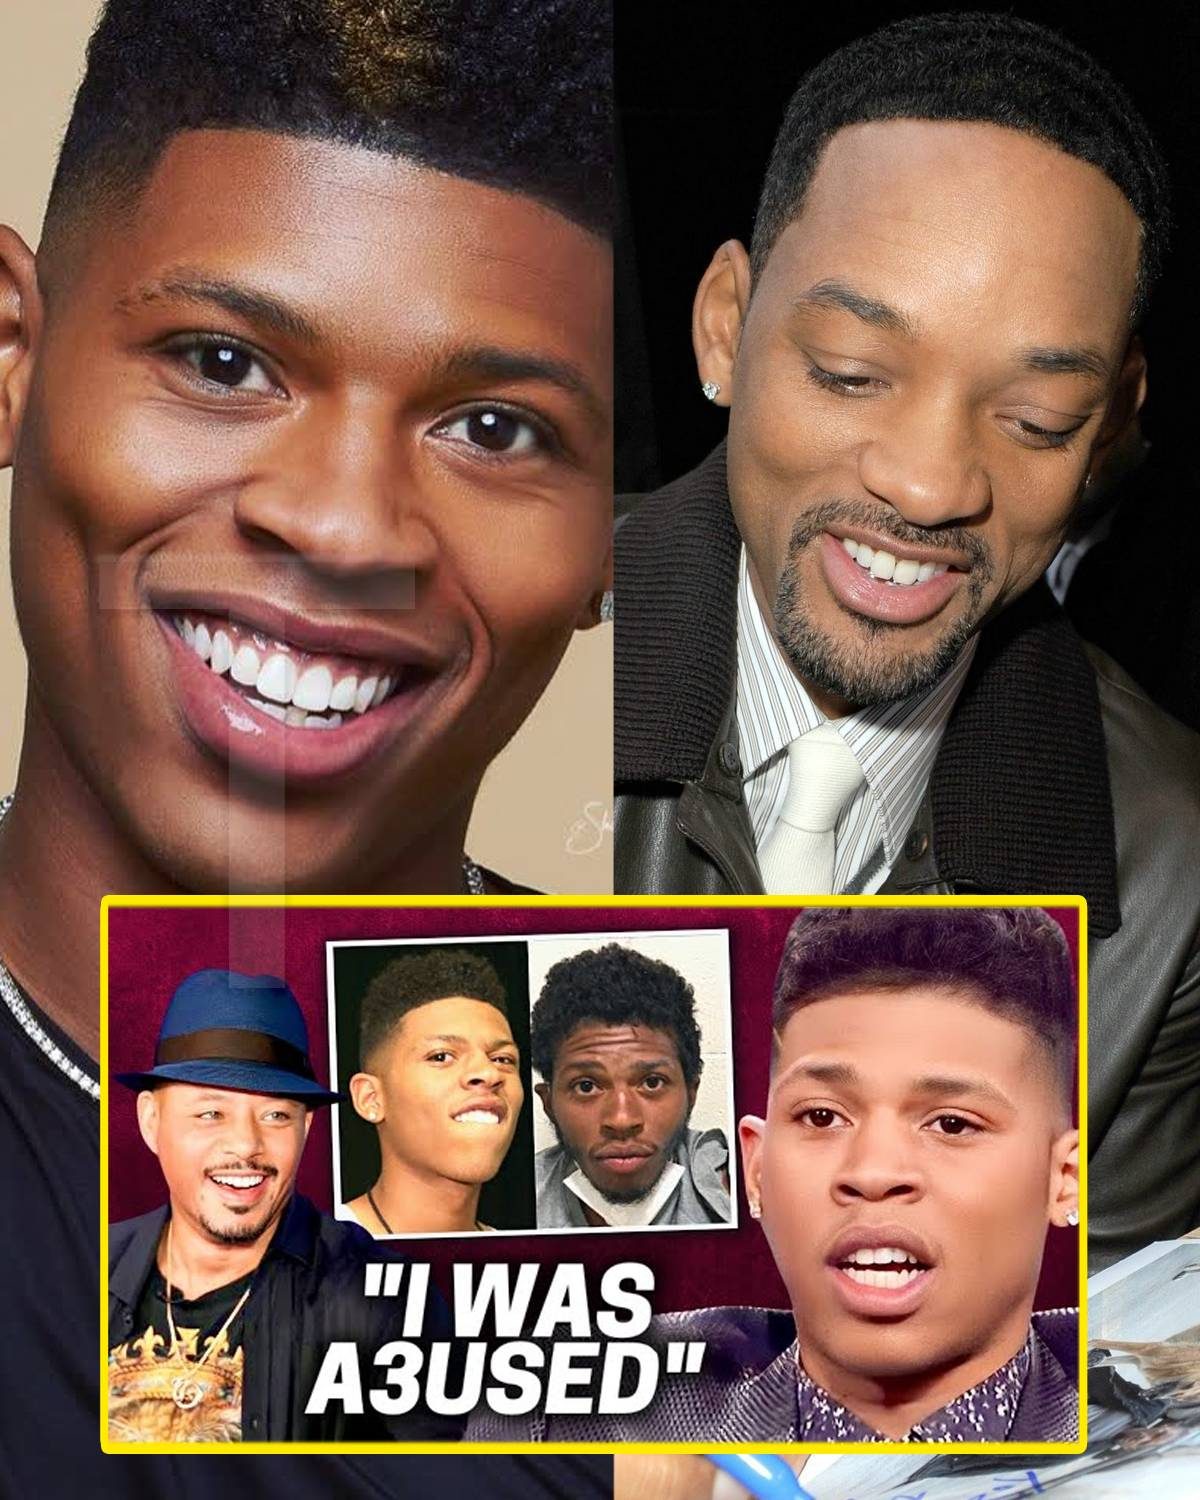 Bryshere Gray Speaks On Being A Victim Of Diddy & Will Smith’s Abu3e | Got Banned From The Industry